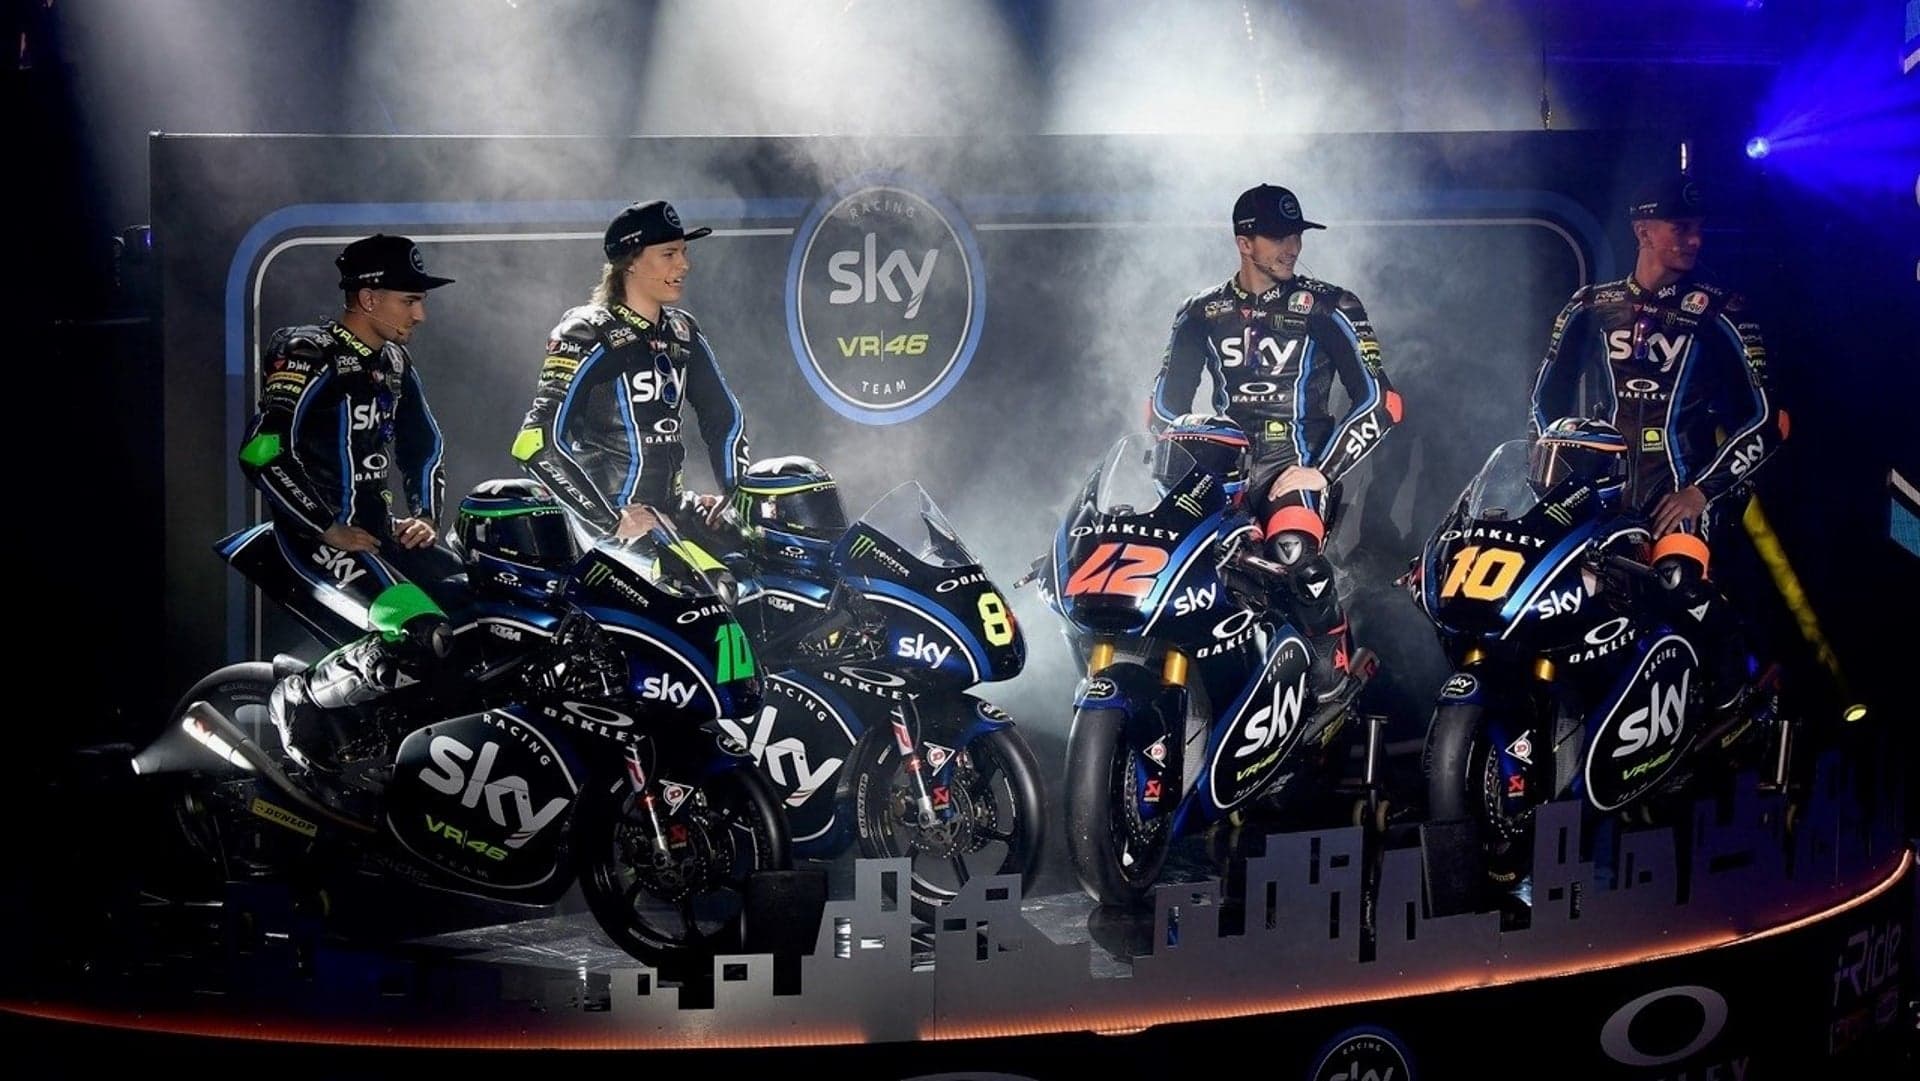 Dainese and AGV Continue Partnership with Sky Racing Team VR46